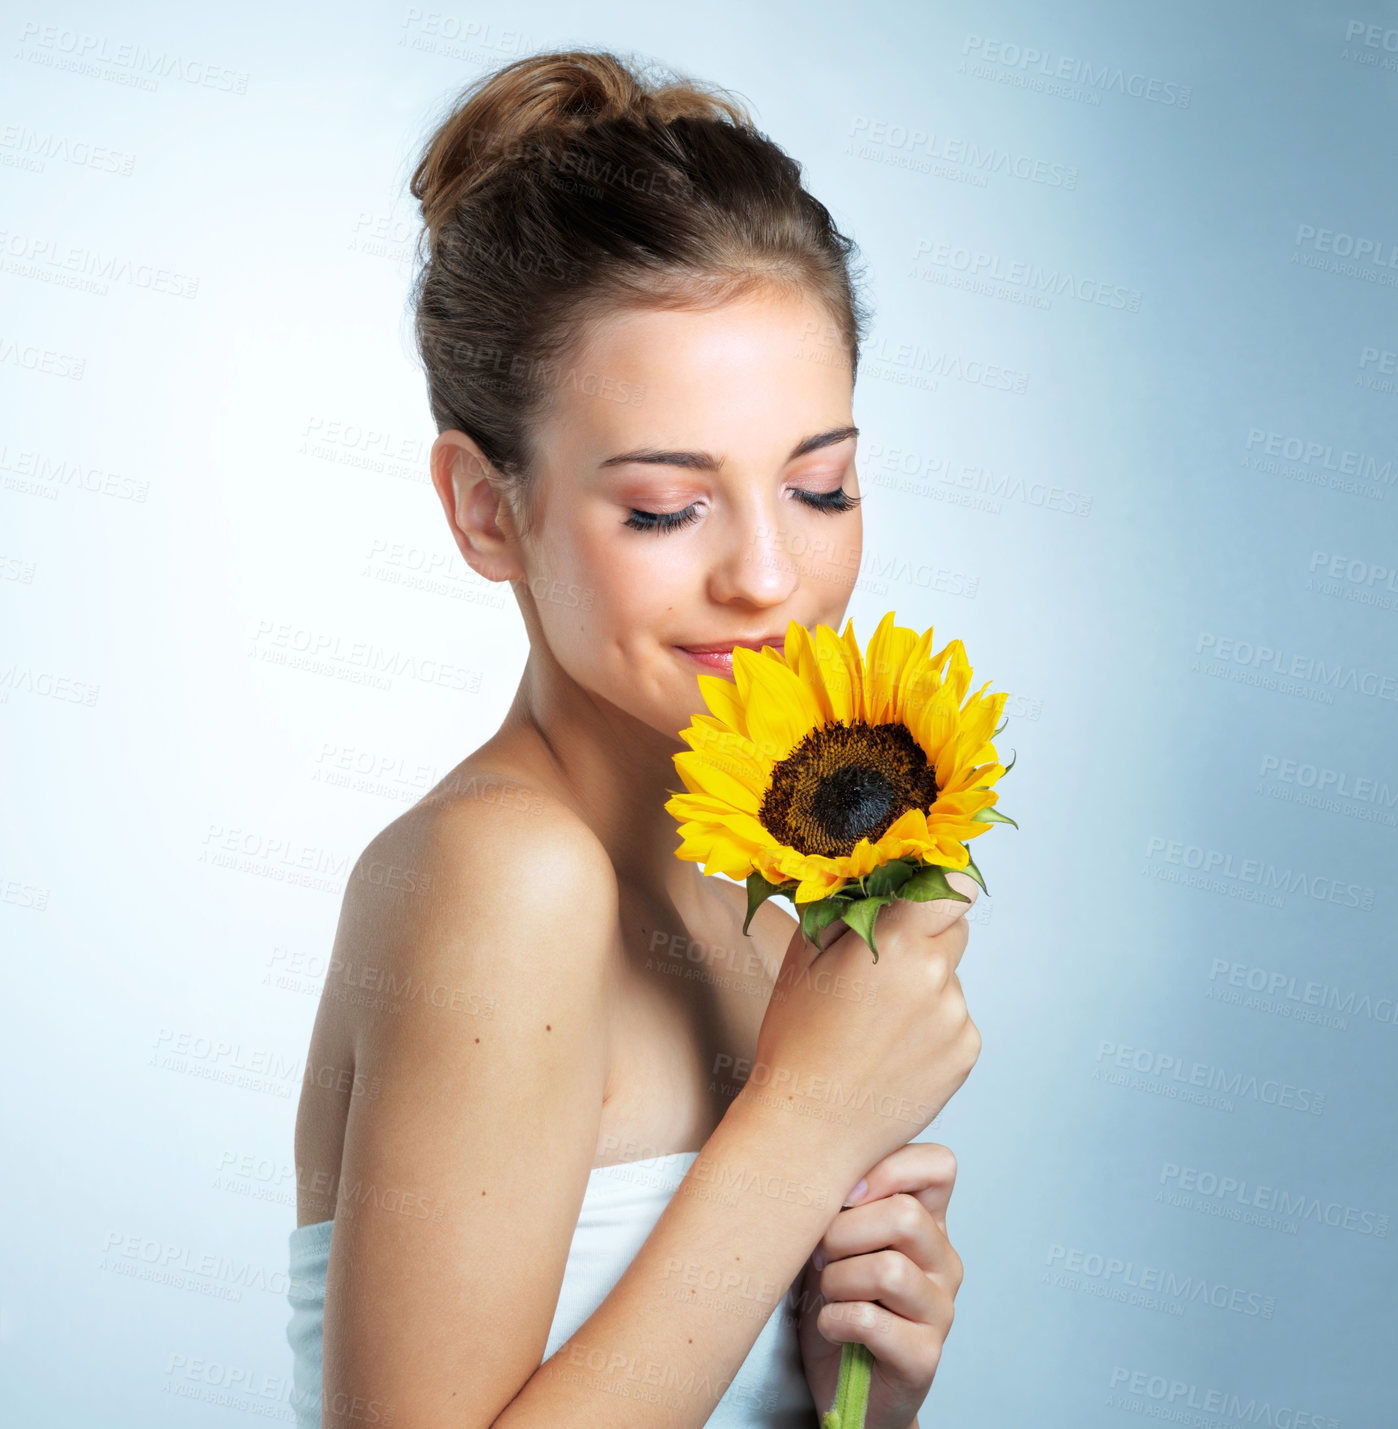 Buy stock photo Studio shot of a beautiful young woman smelling a sunflower